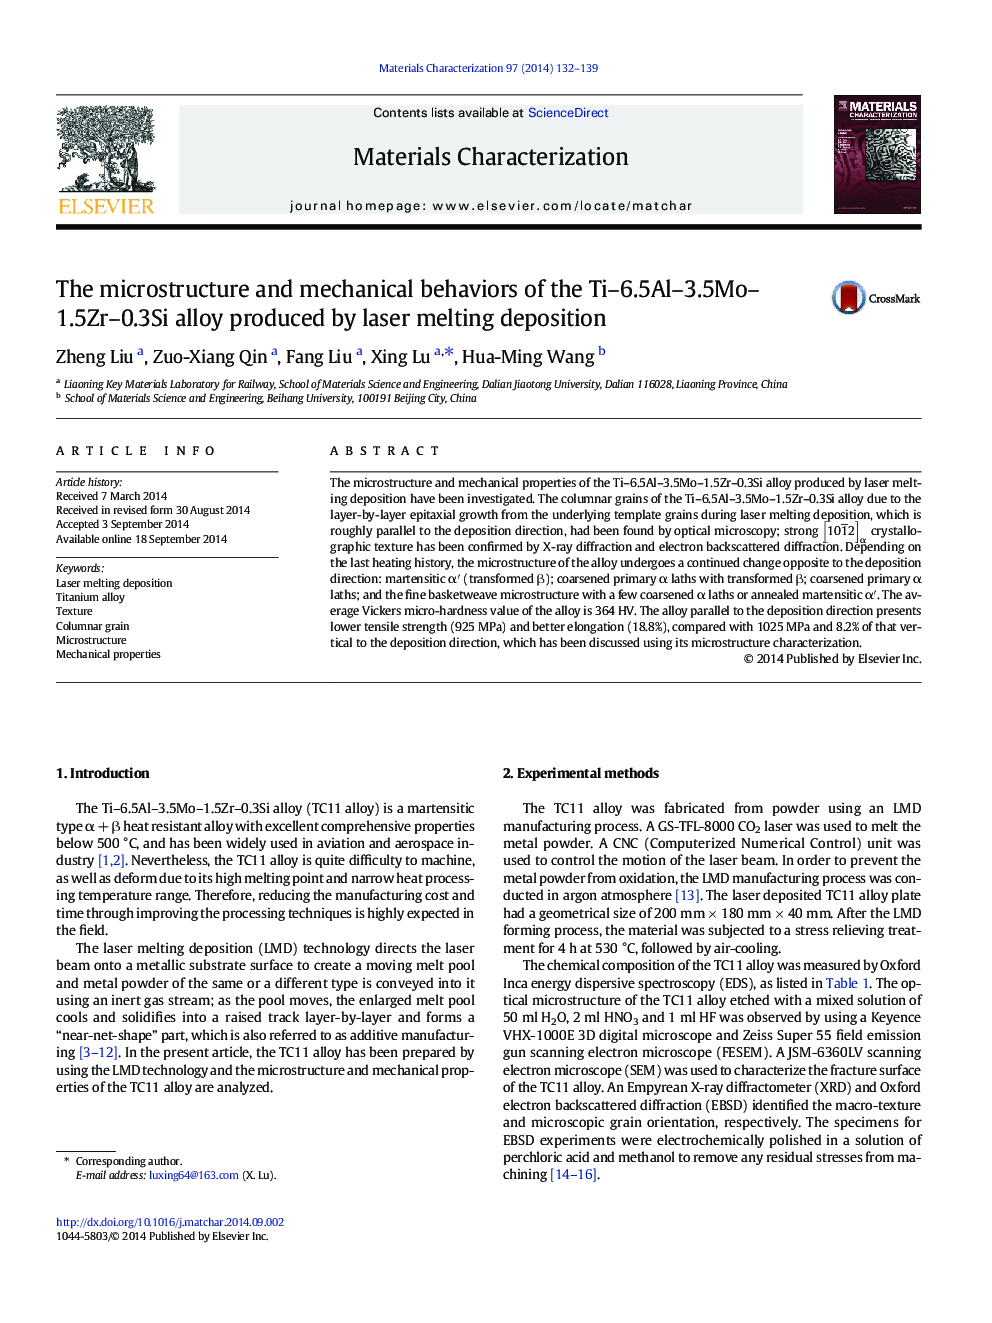 The microstructure and mechanical behaviors of the Ti-6.5Al-3.5Mo-1.5Zr-0.3Si alloy produced by laser melting deposition